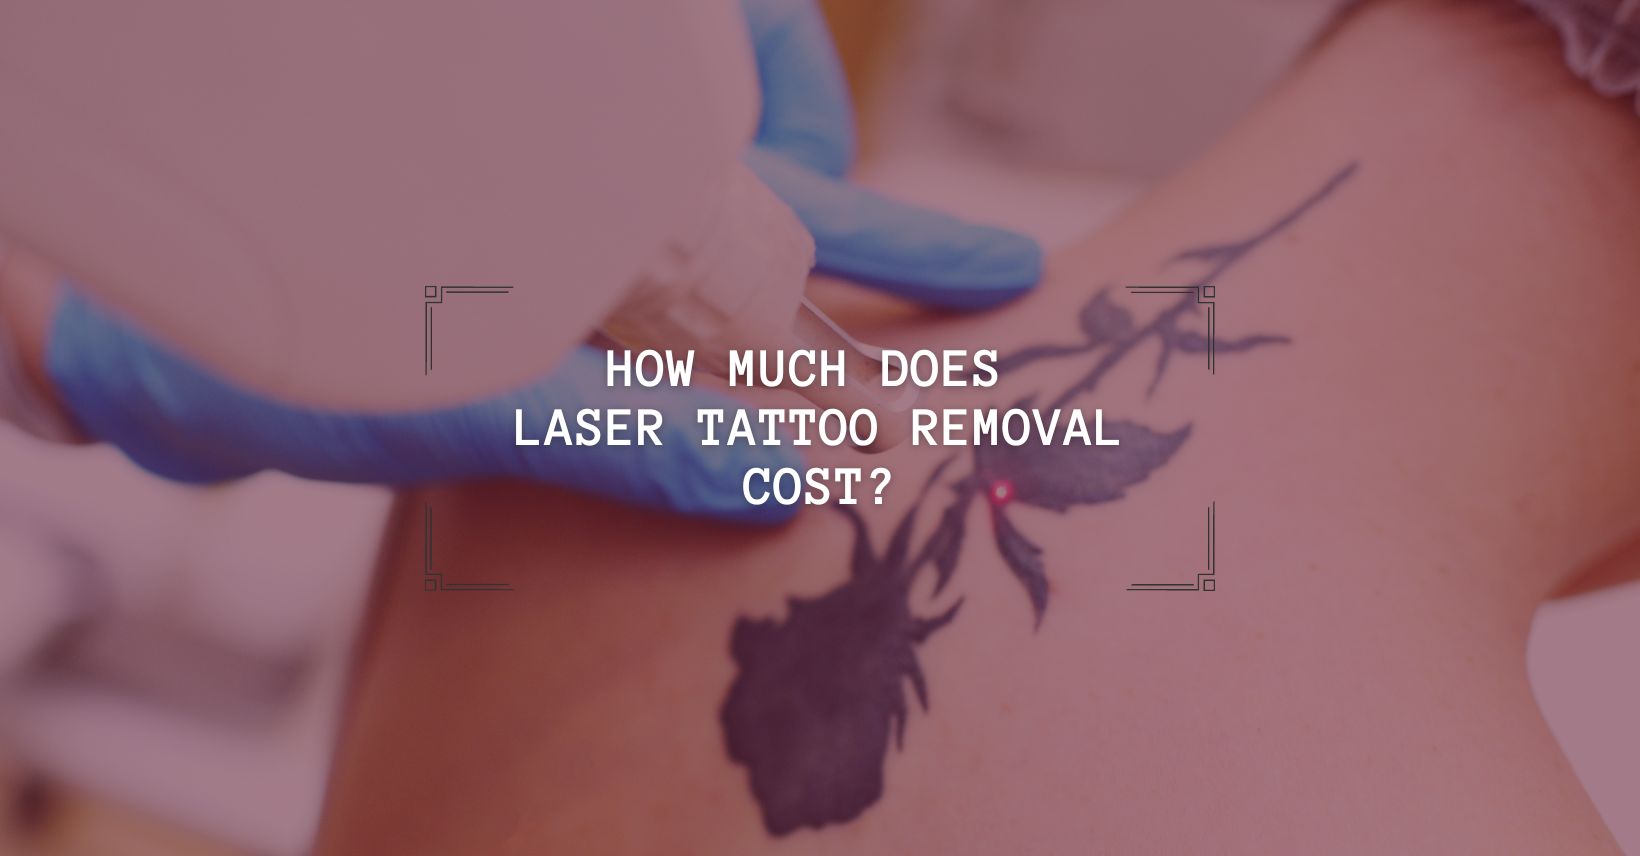 How much does laser tattoo removal cost